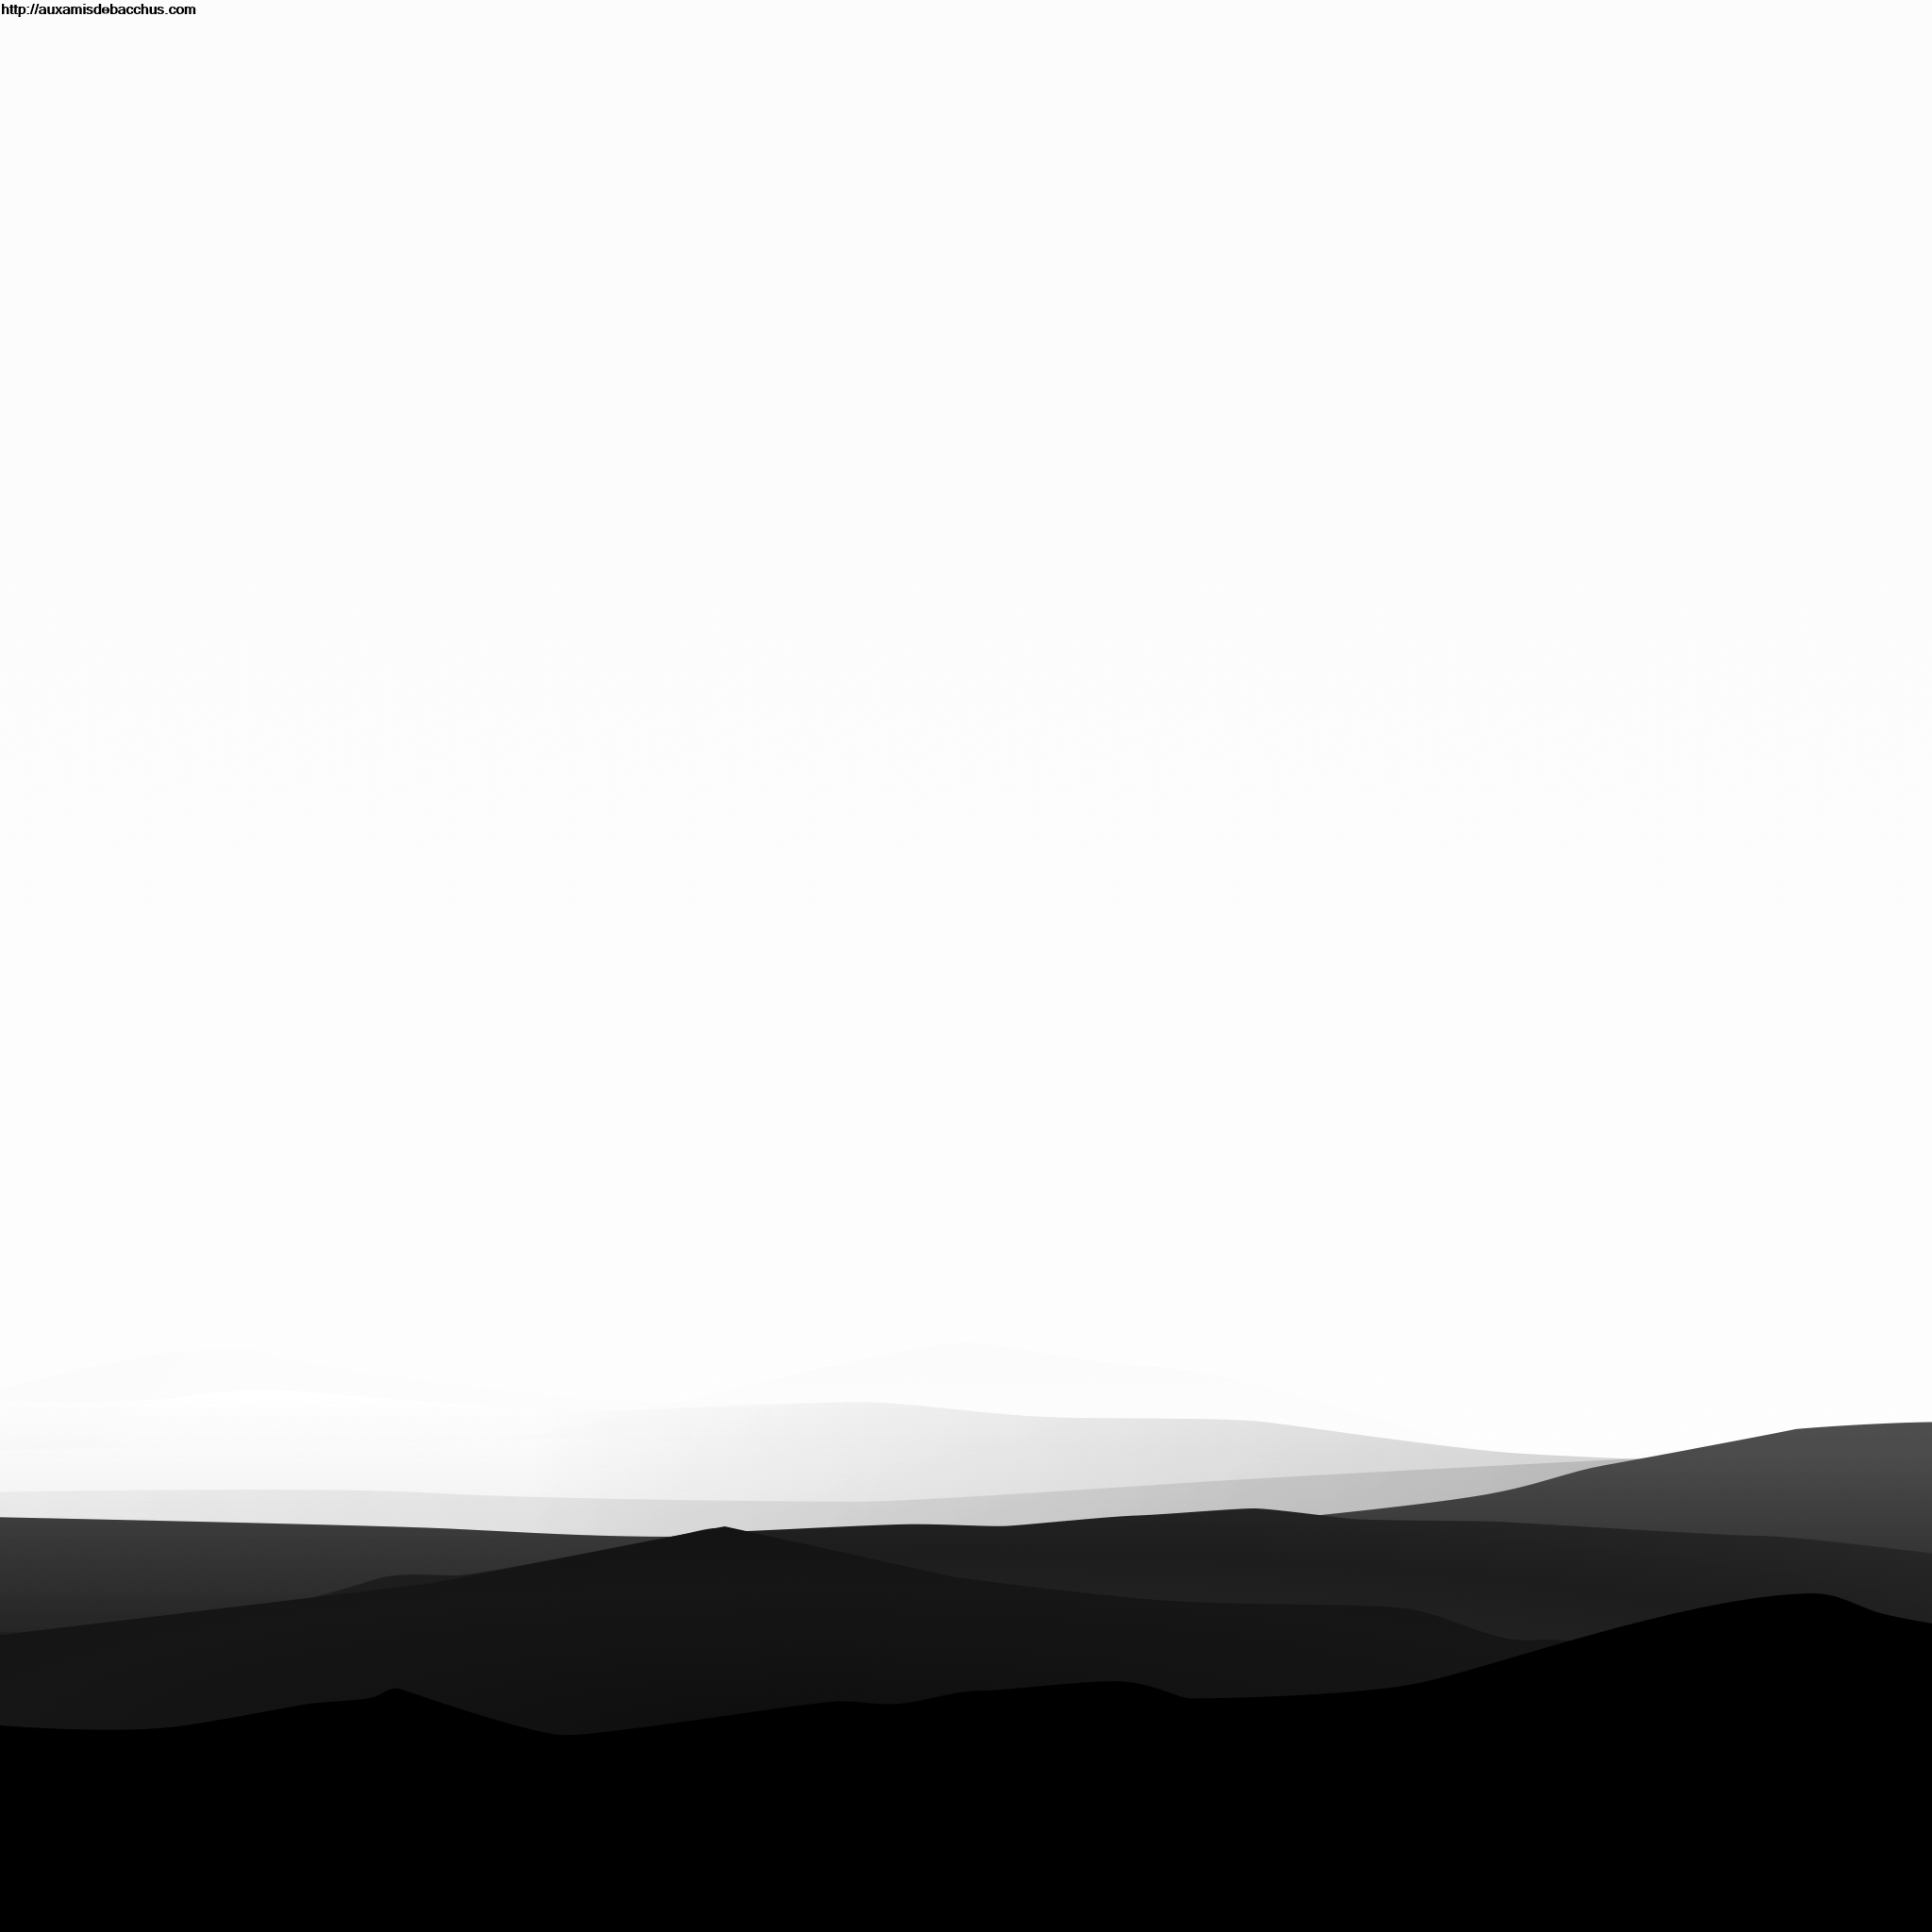 Black And White Minimalist Iphone Wallpapers Desktop - Hill - HD Wallpaper 